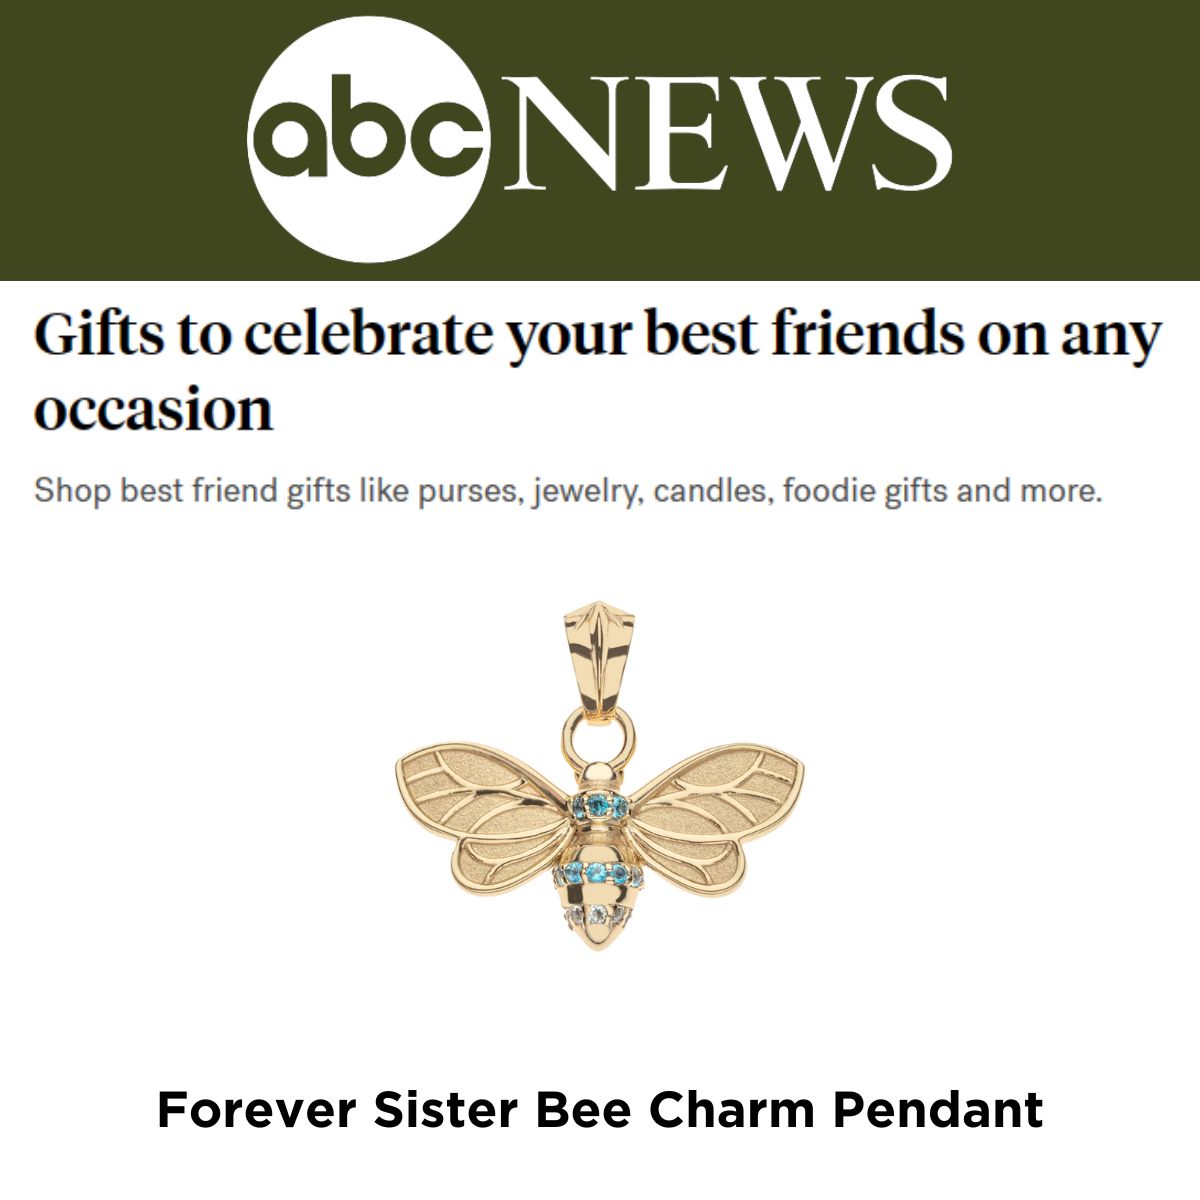 Press Highlight: ABC News "Gifts to Celebrate your Best Friends on Any Occasion"